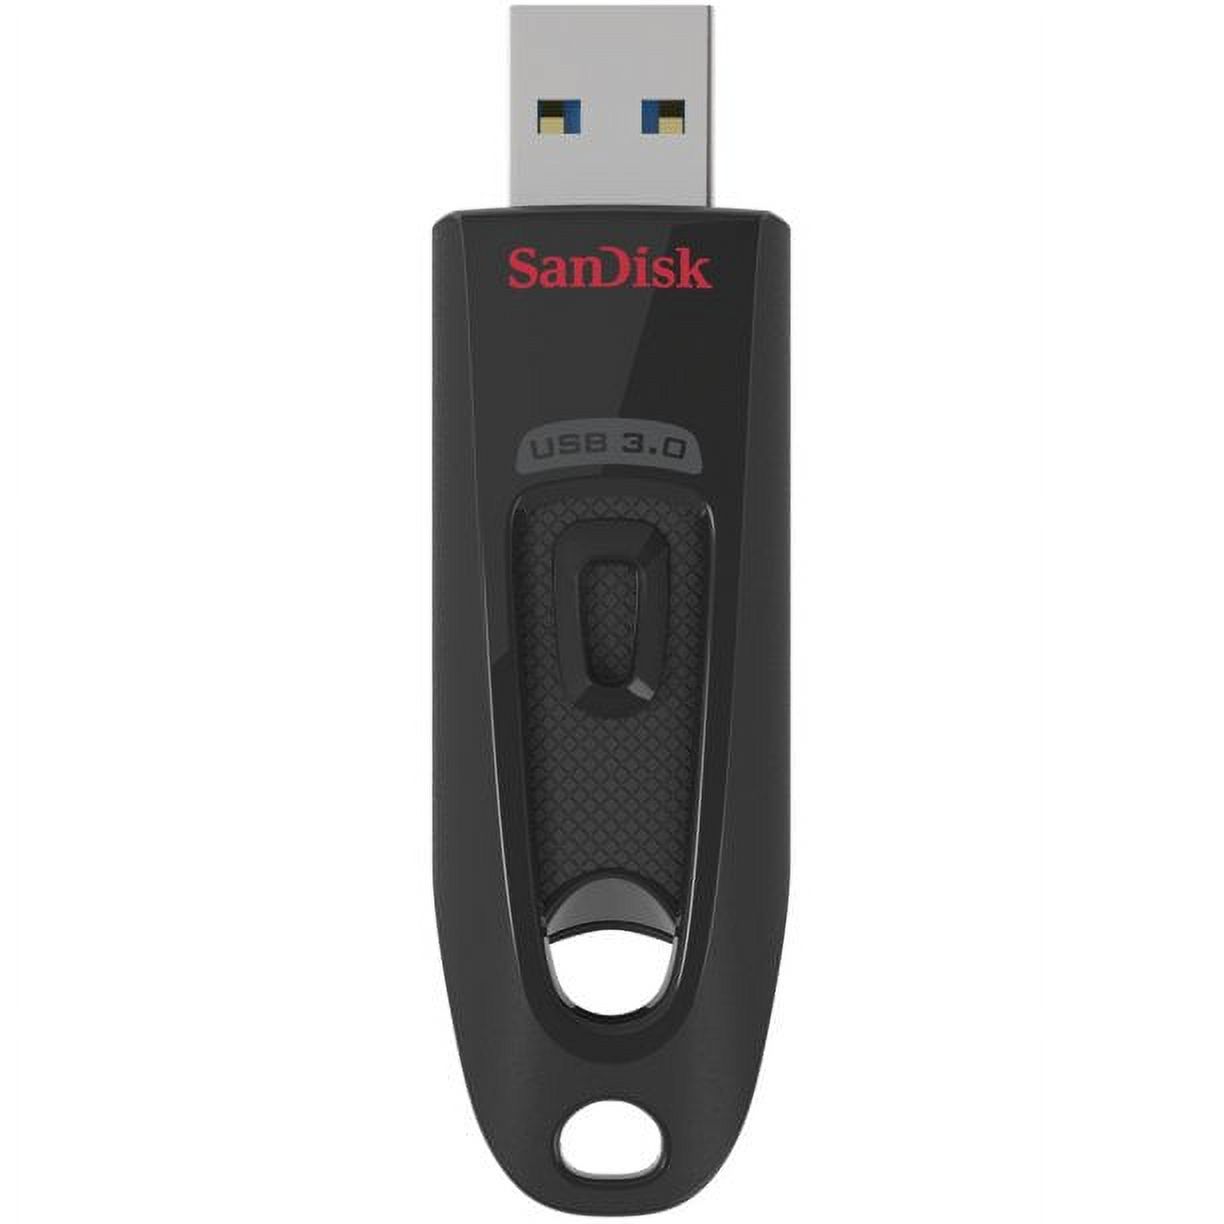 SanDisk 256GB Ultra USB 3.0 Flash Drive - 130MB/s - SDCZ48-256G-AW4 - image 1 of 8